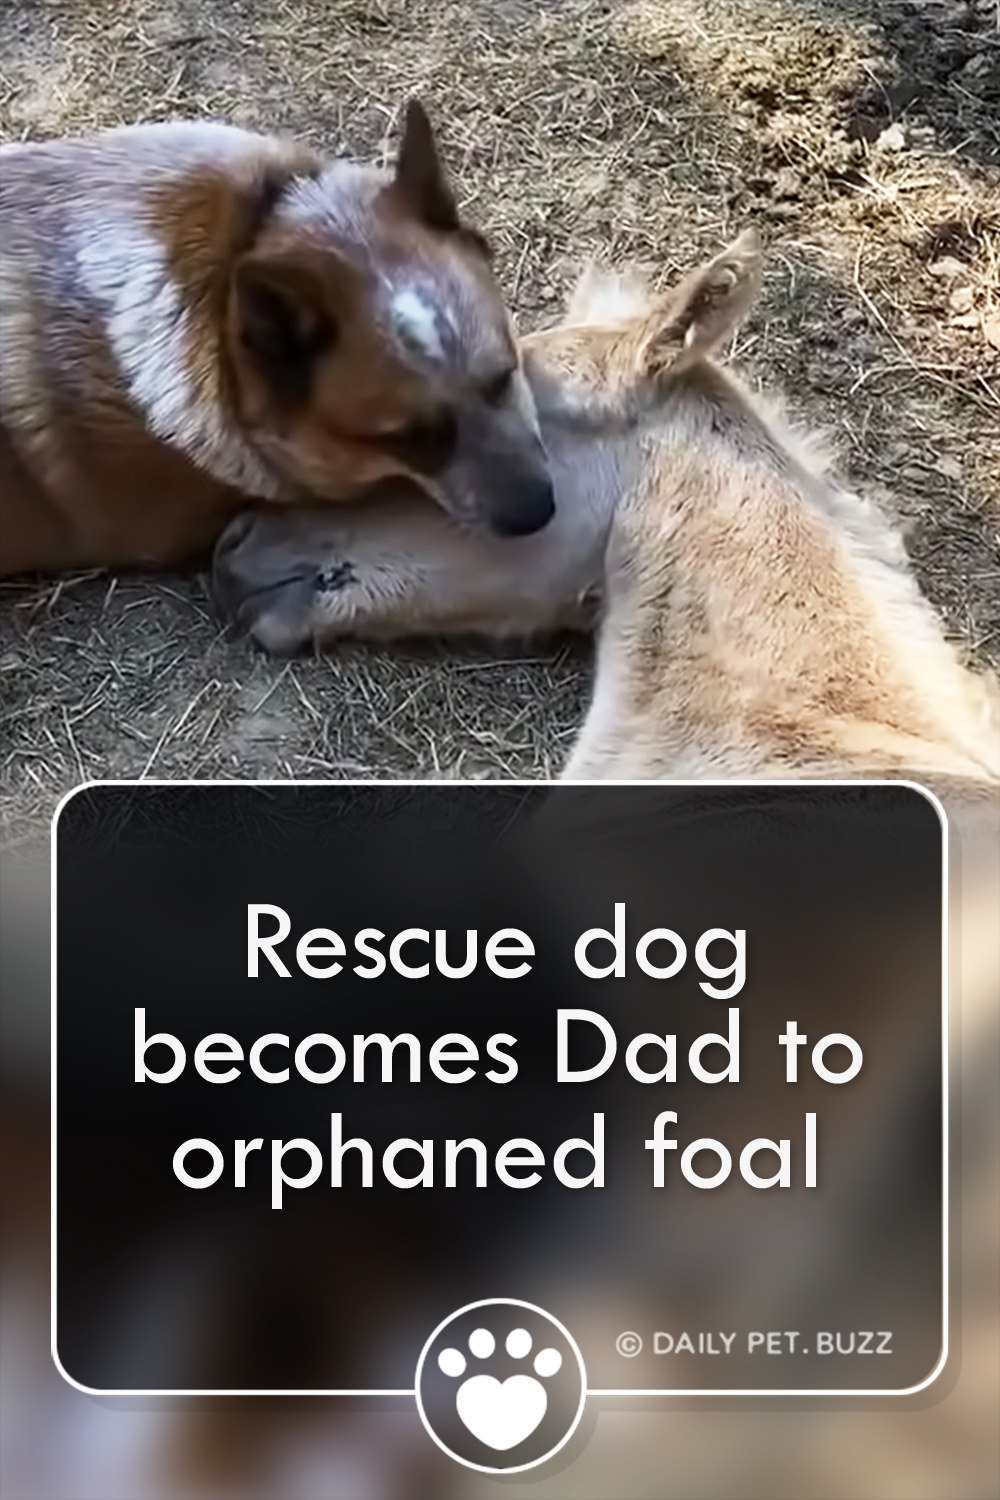 Rescue dog becomes Dad to orphaned foal